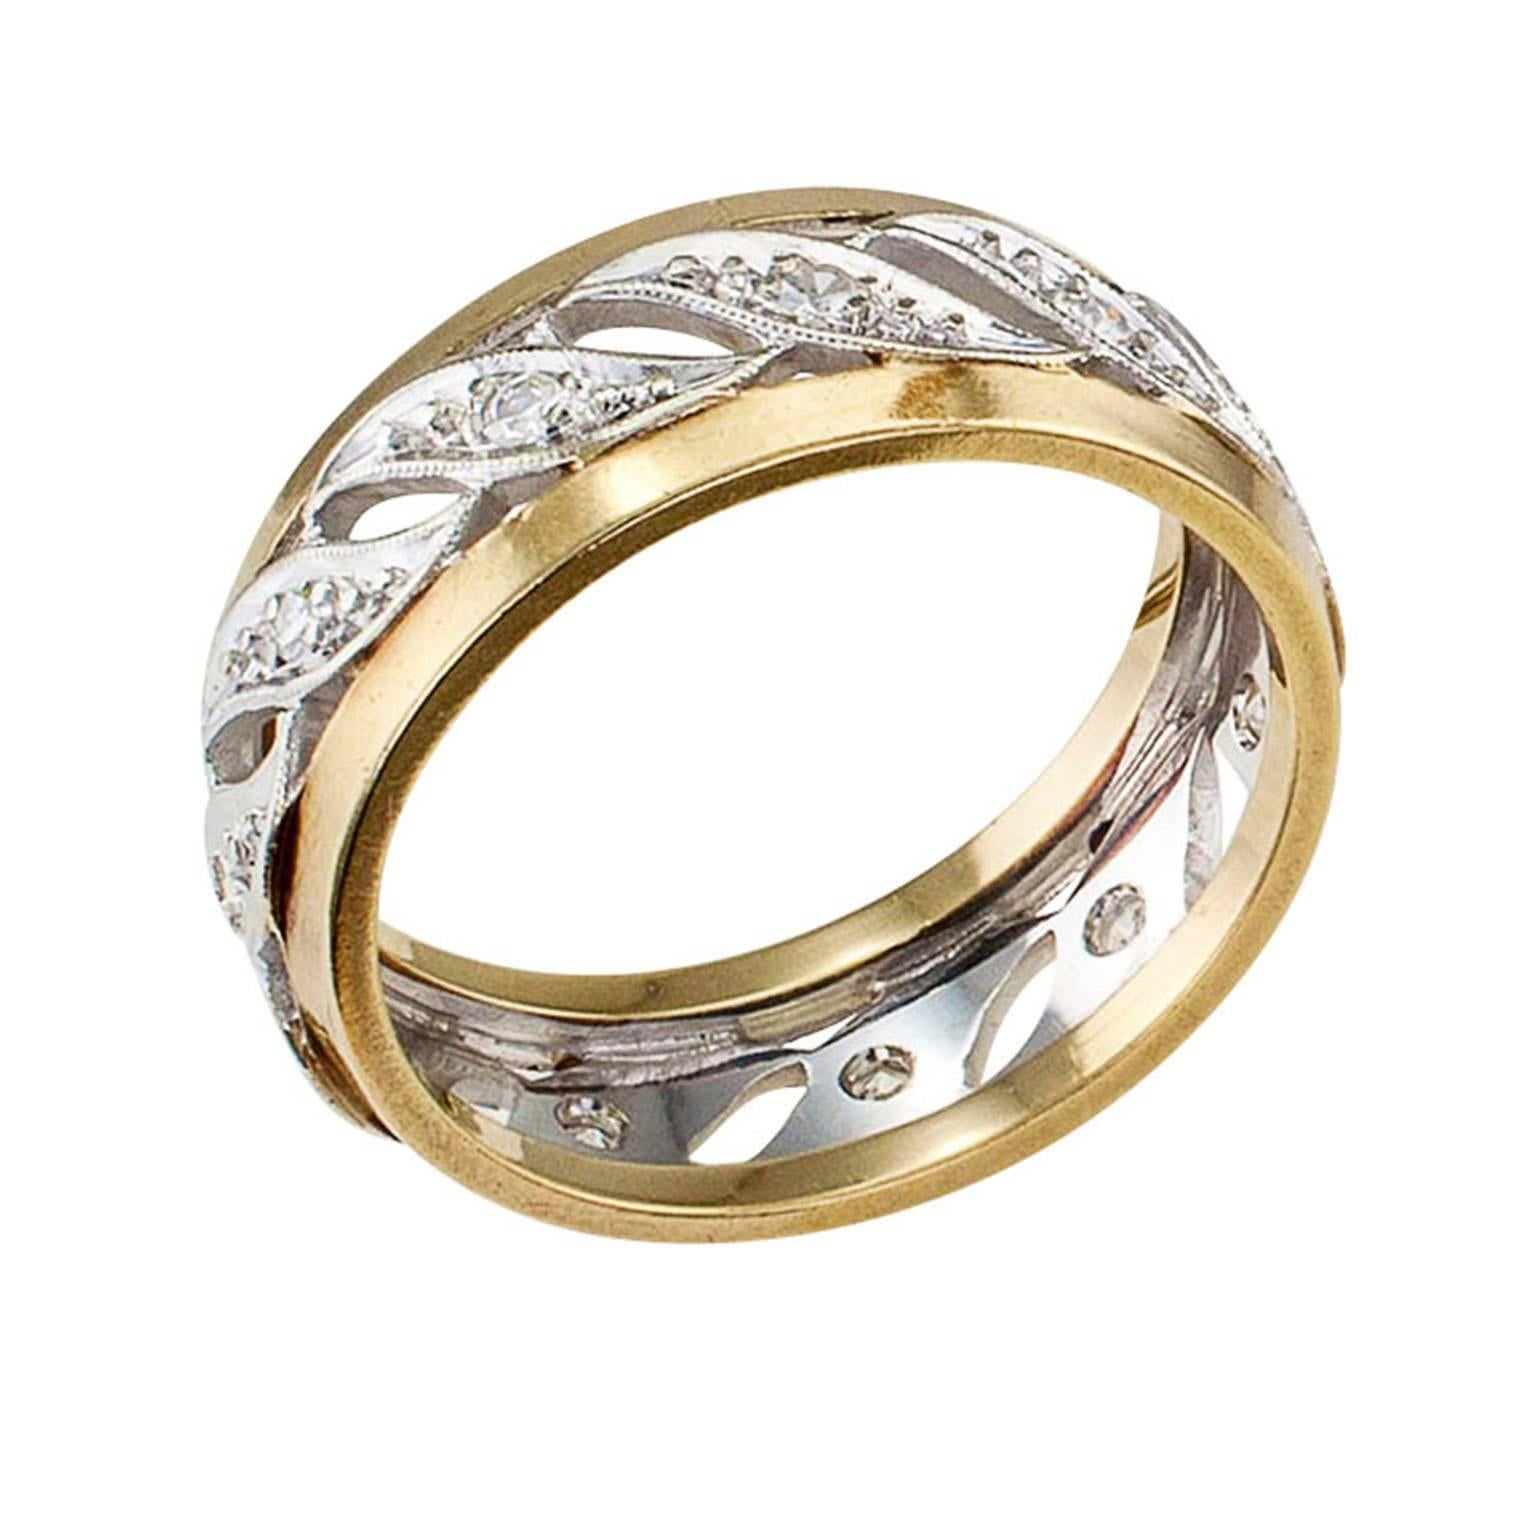 Retro 1940s Two Color Gold Diamond Wedding Band Ring